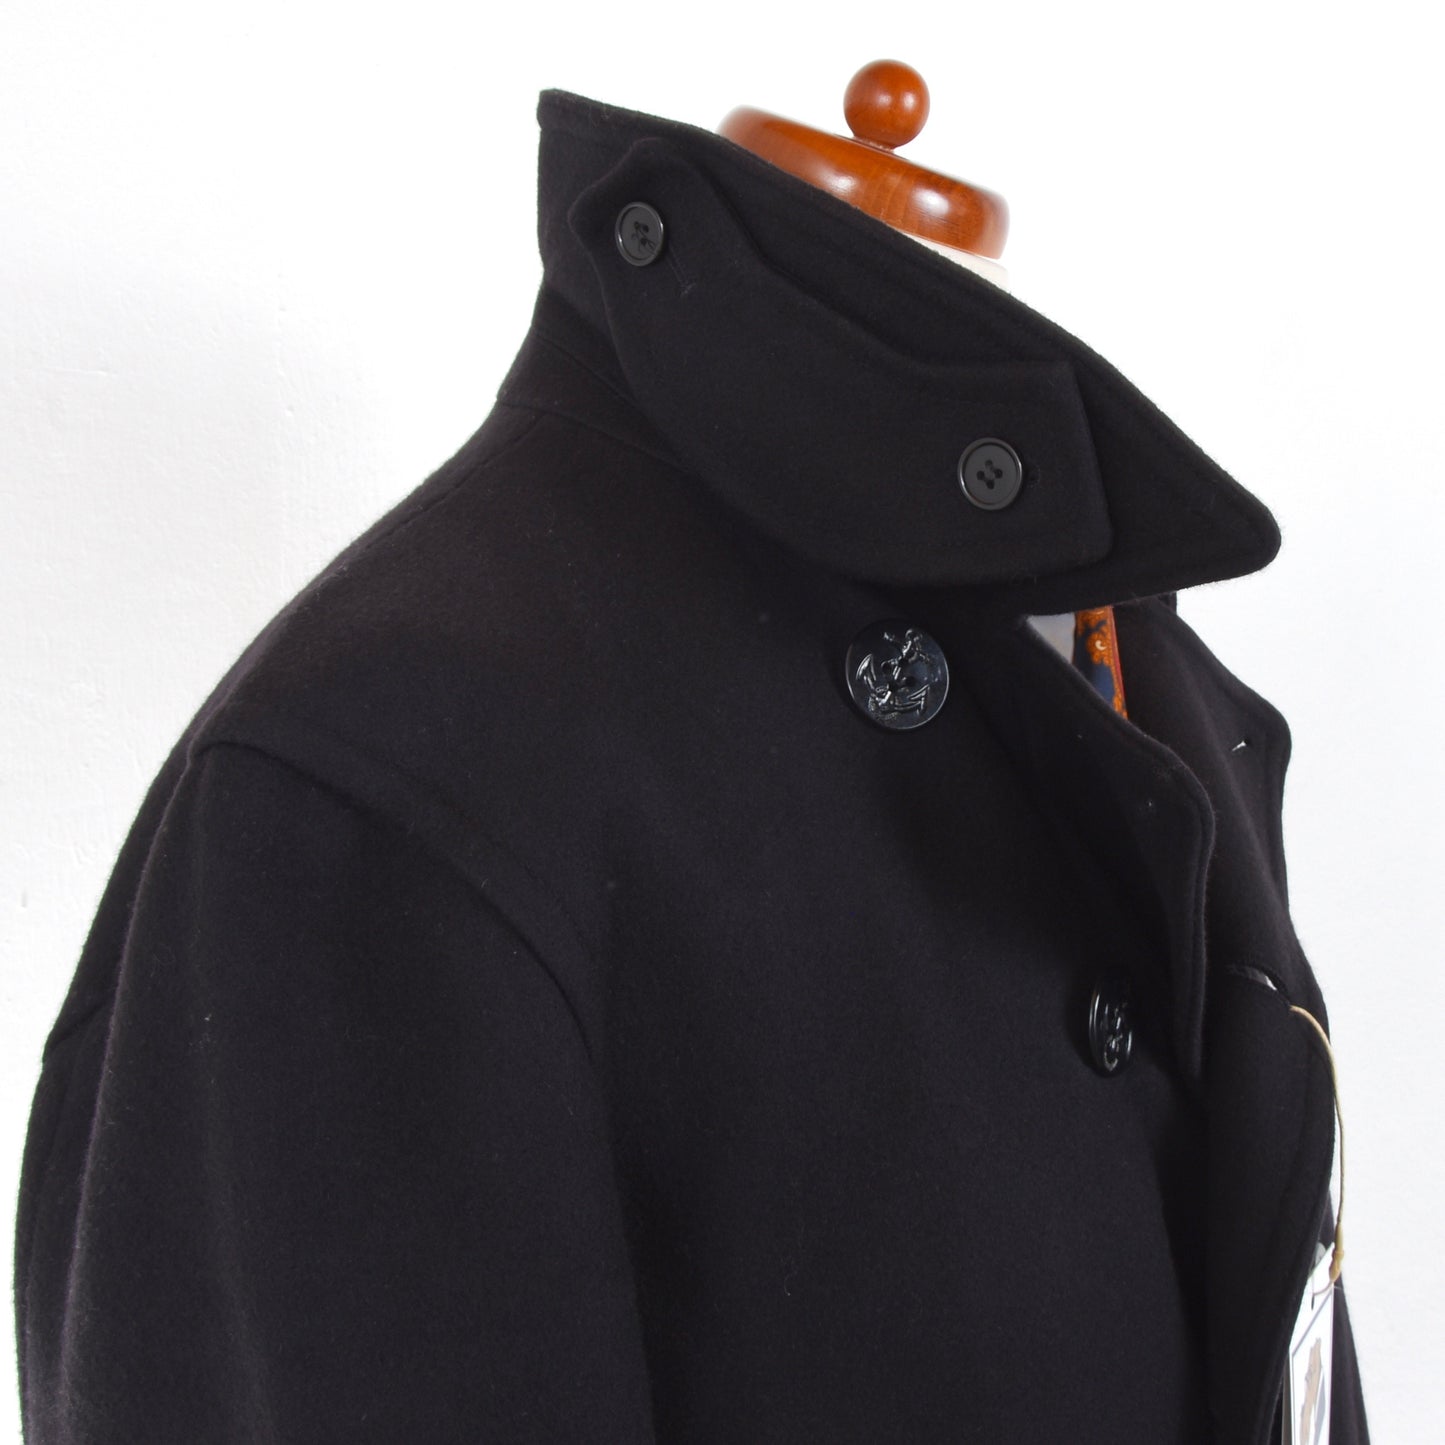 Gloverall Reefer Pea Coat Size 52 - Navy Blue